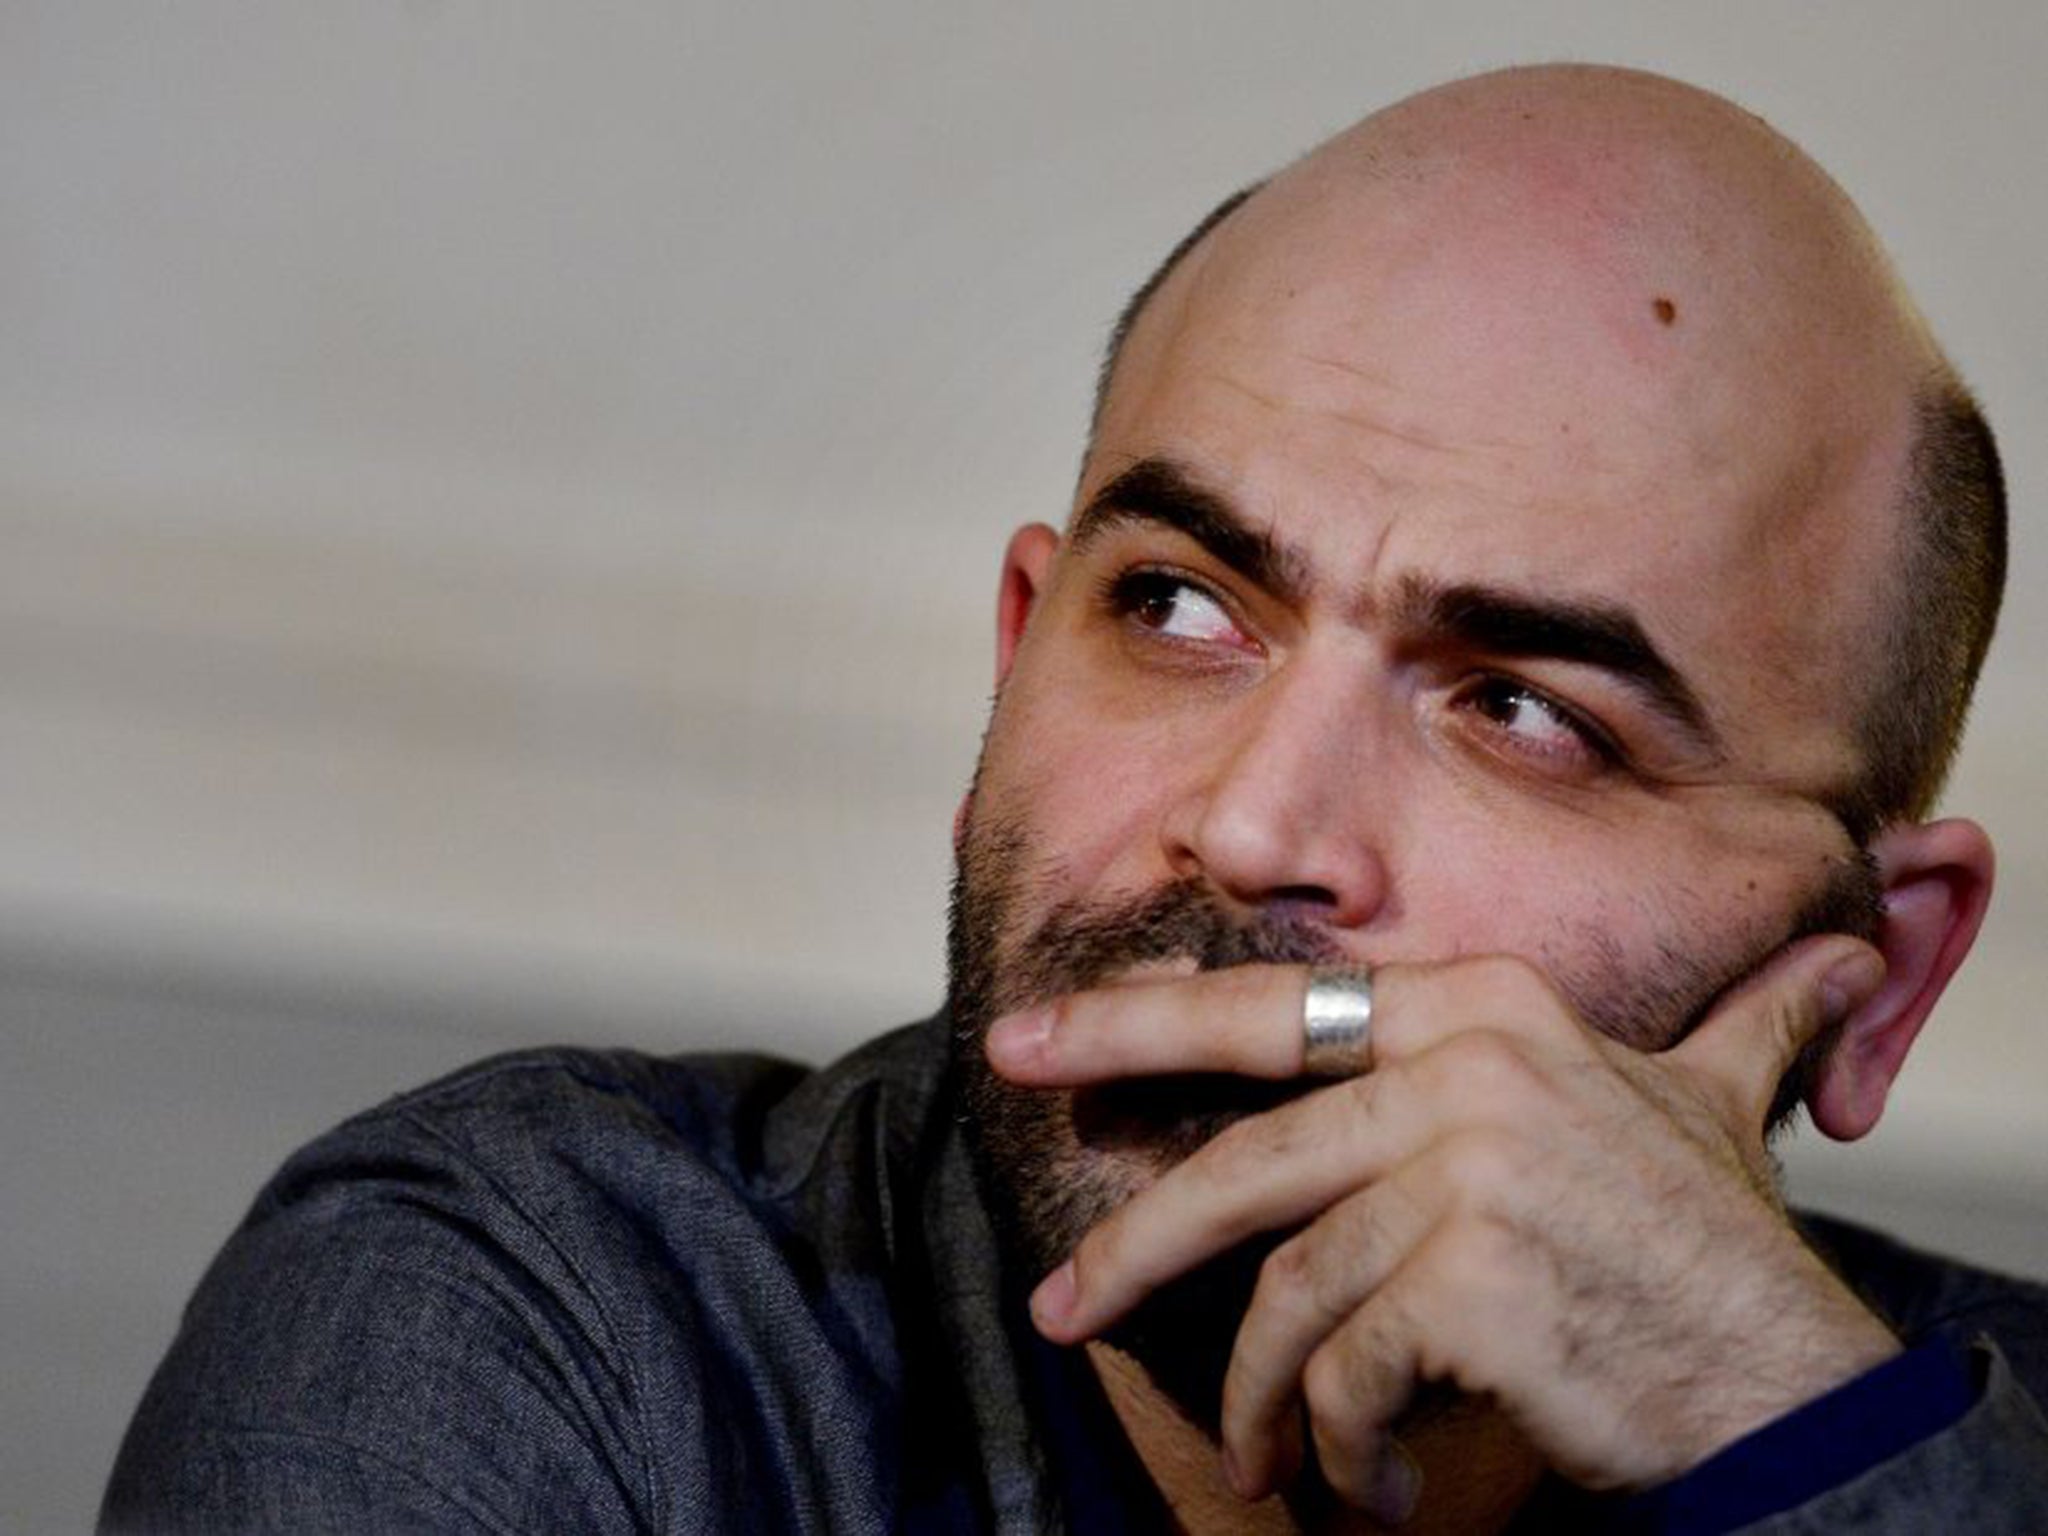 Roberto Saviano, the author of the highly acclaimed book 'Gomorrah' about Naples’s equivalent of the Mafia